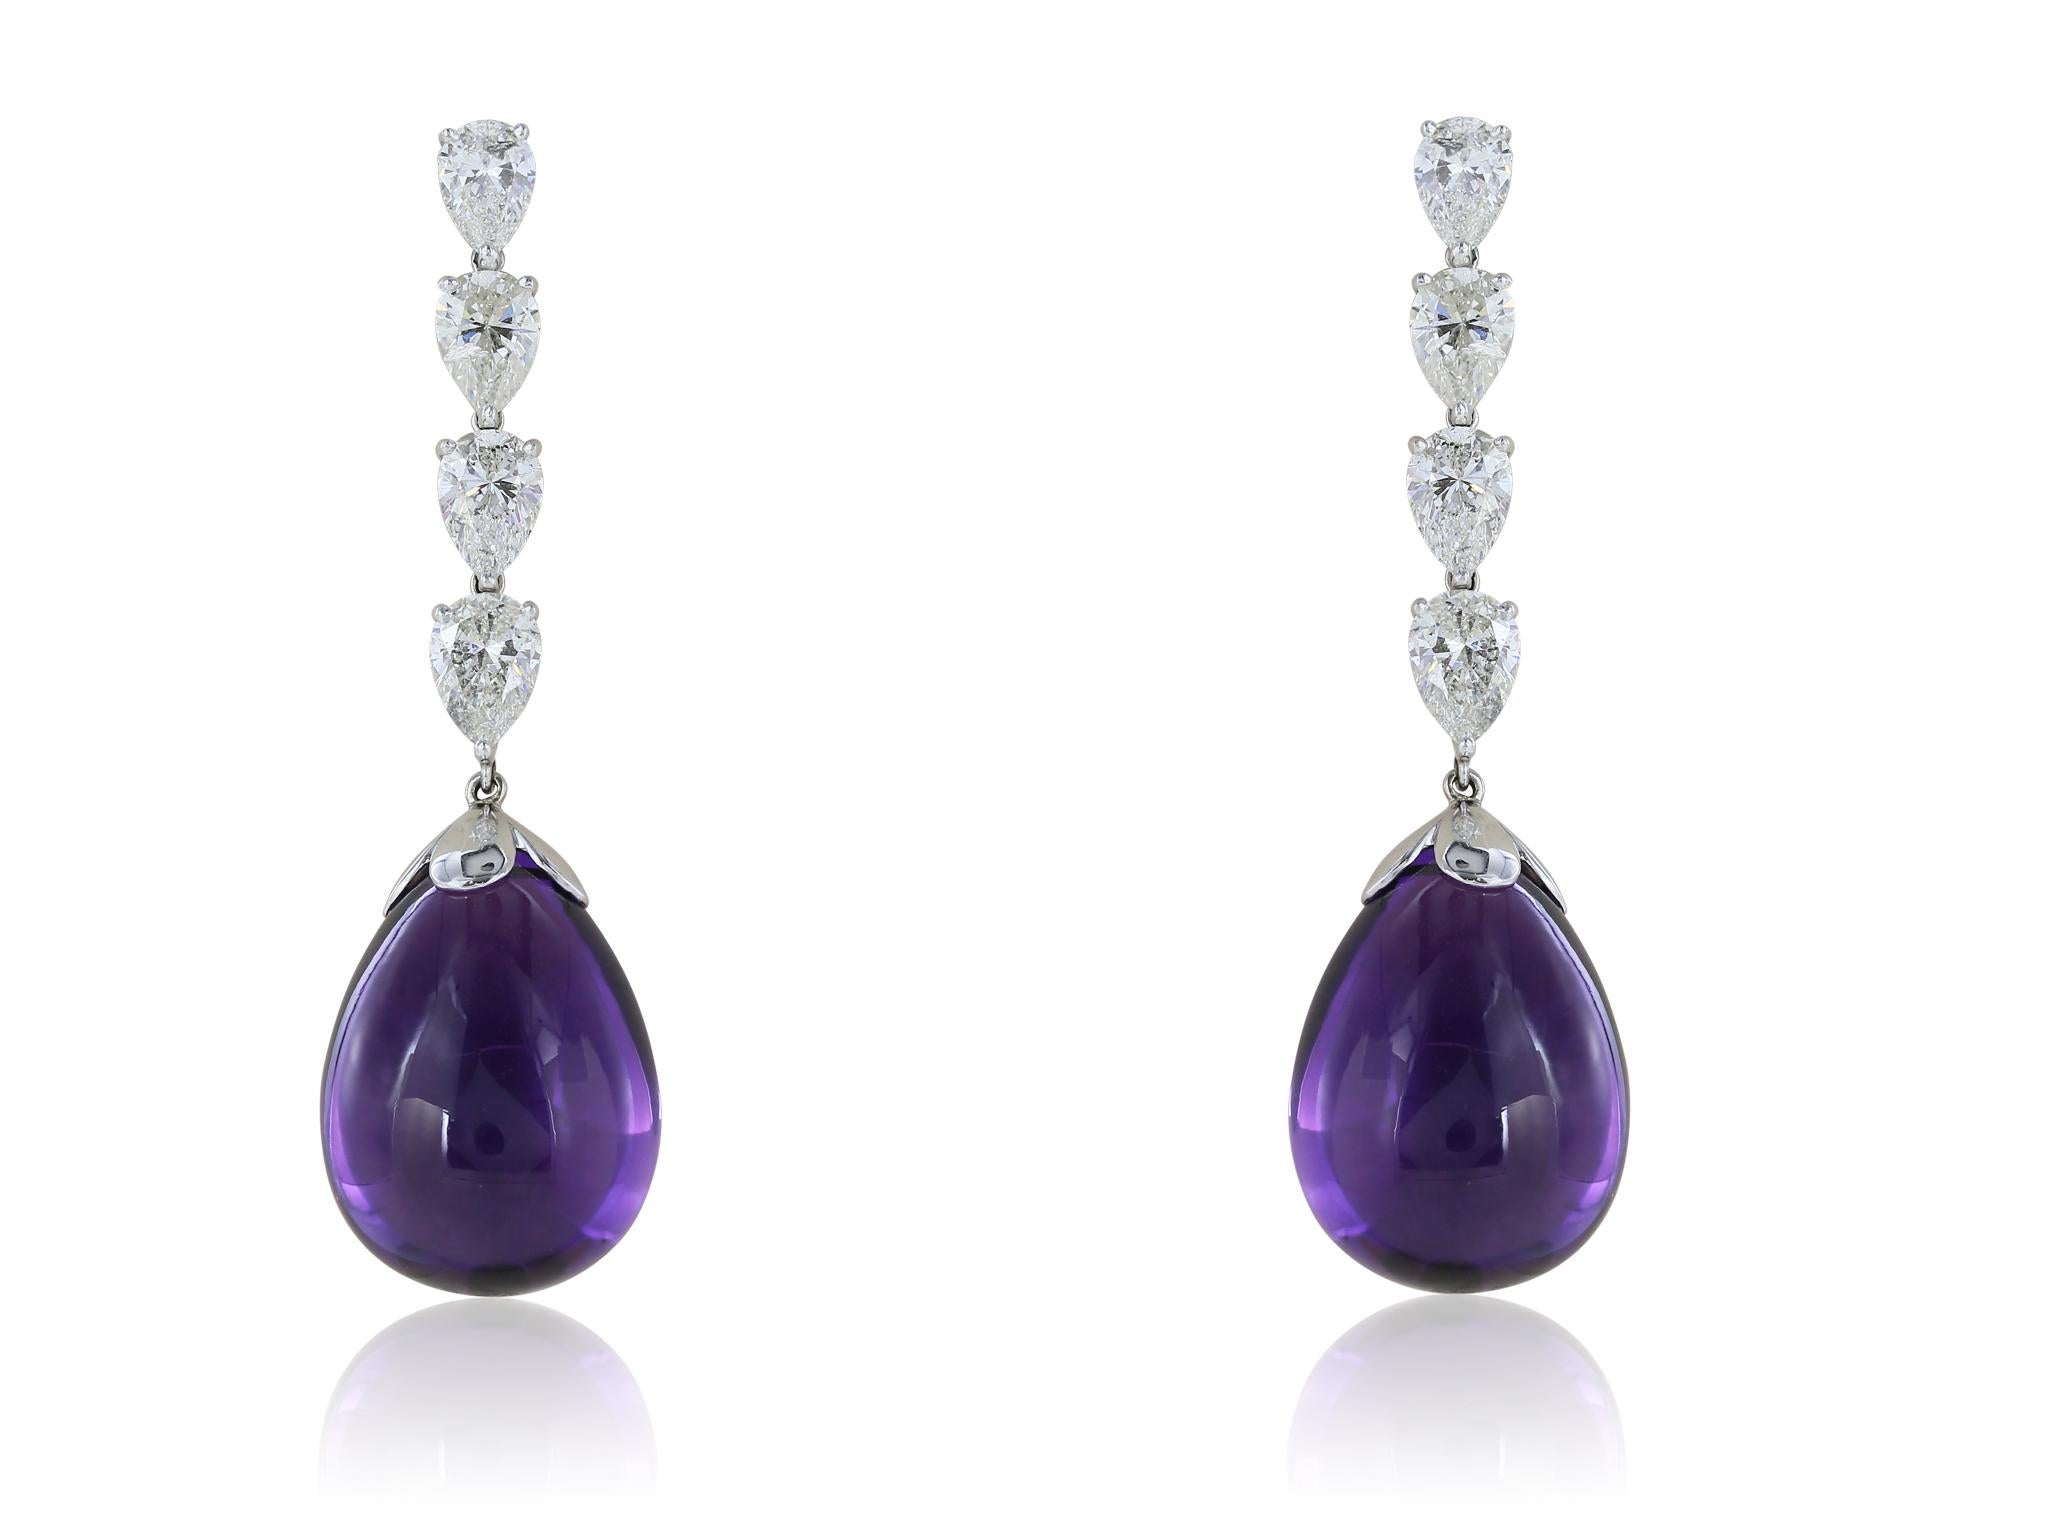 One of a kind platinum Amethyst and Diamond drop earrings, consisting of 2 pear shape briolette drops, with a total carat weight of 63.82 carats, dangling from 4 pear shape prong set diamonds on each earring, total of 8 diamonds, with a total carat